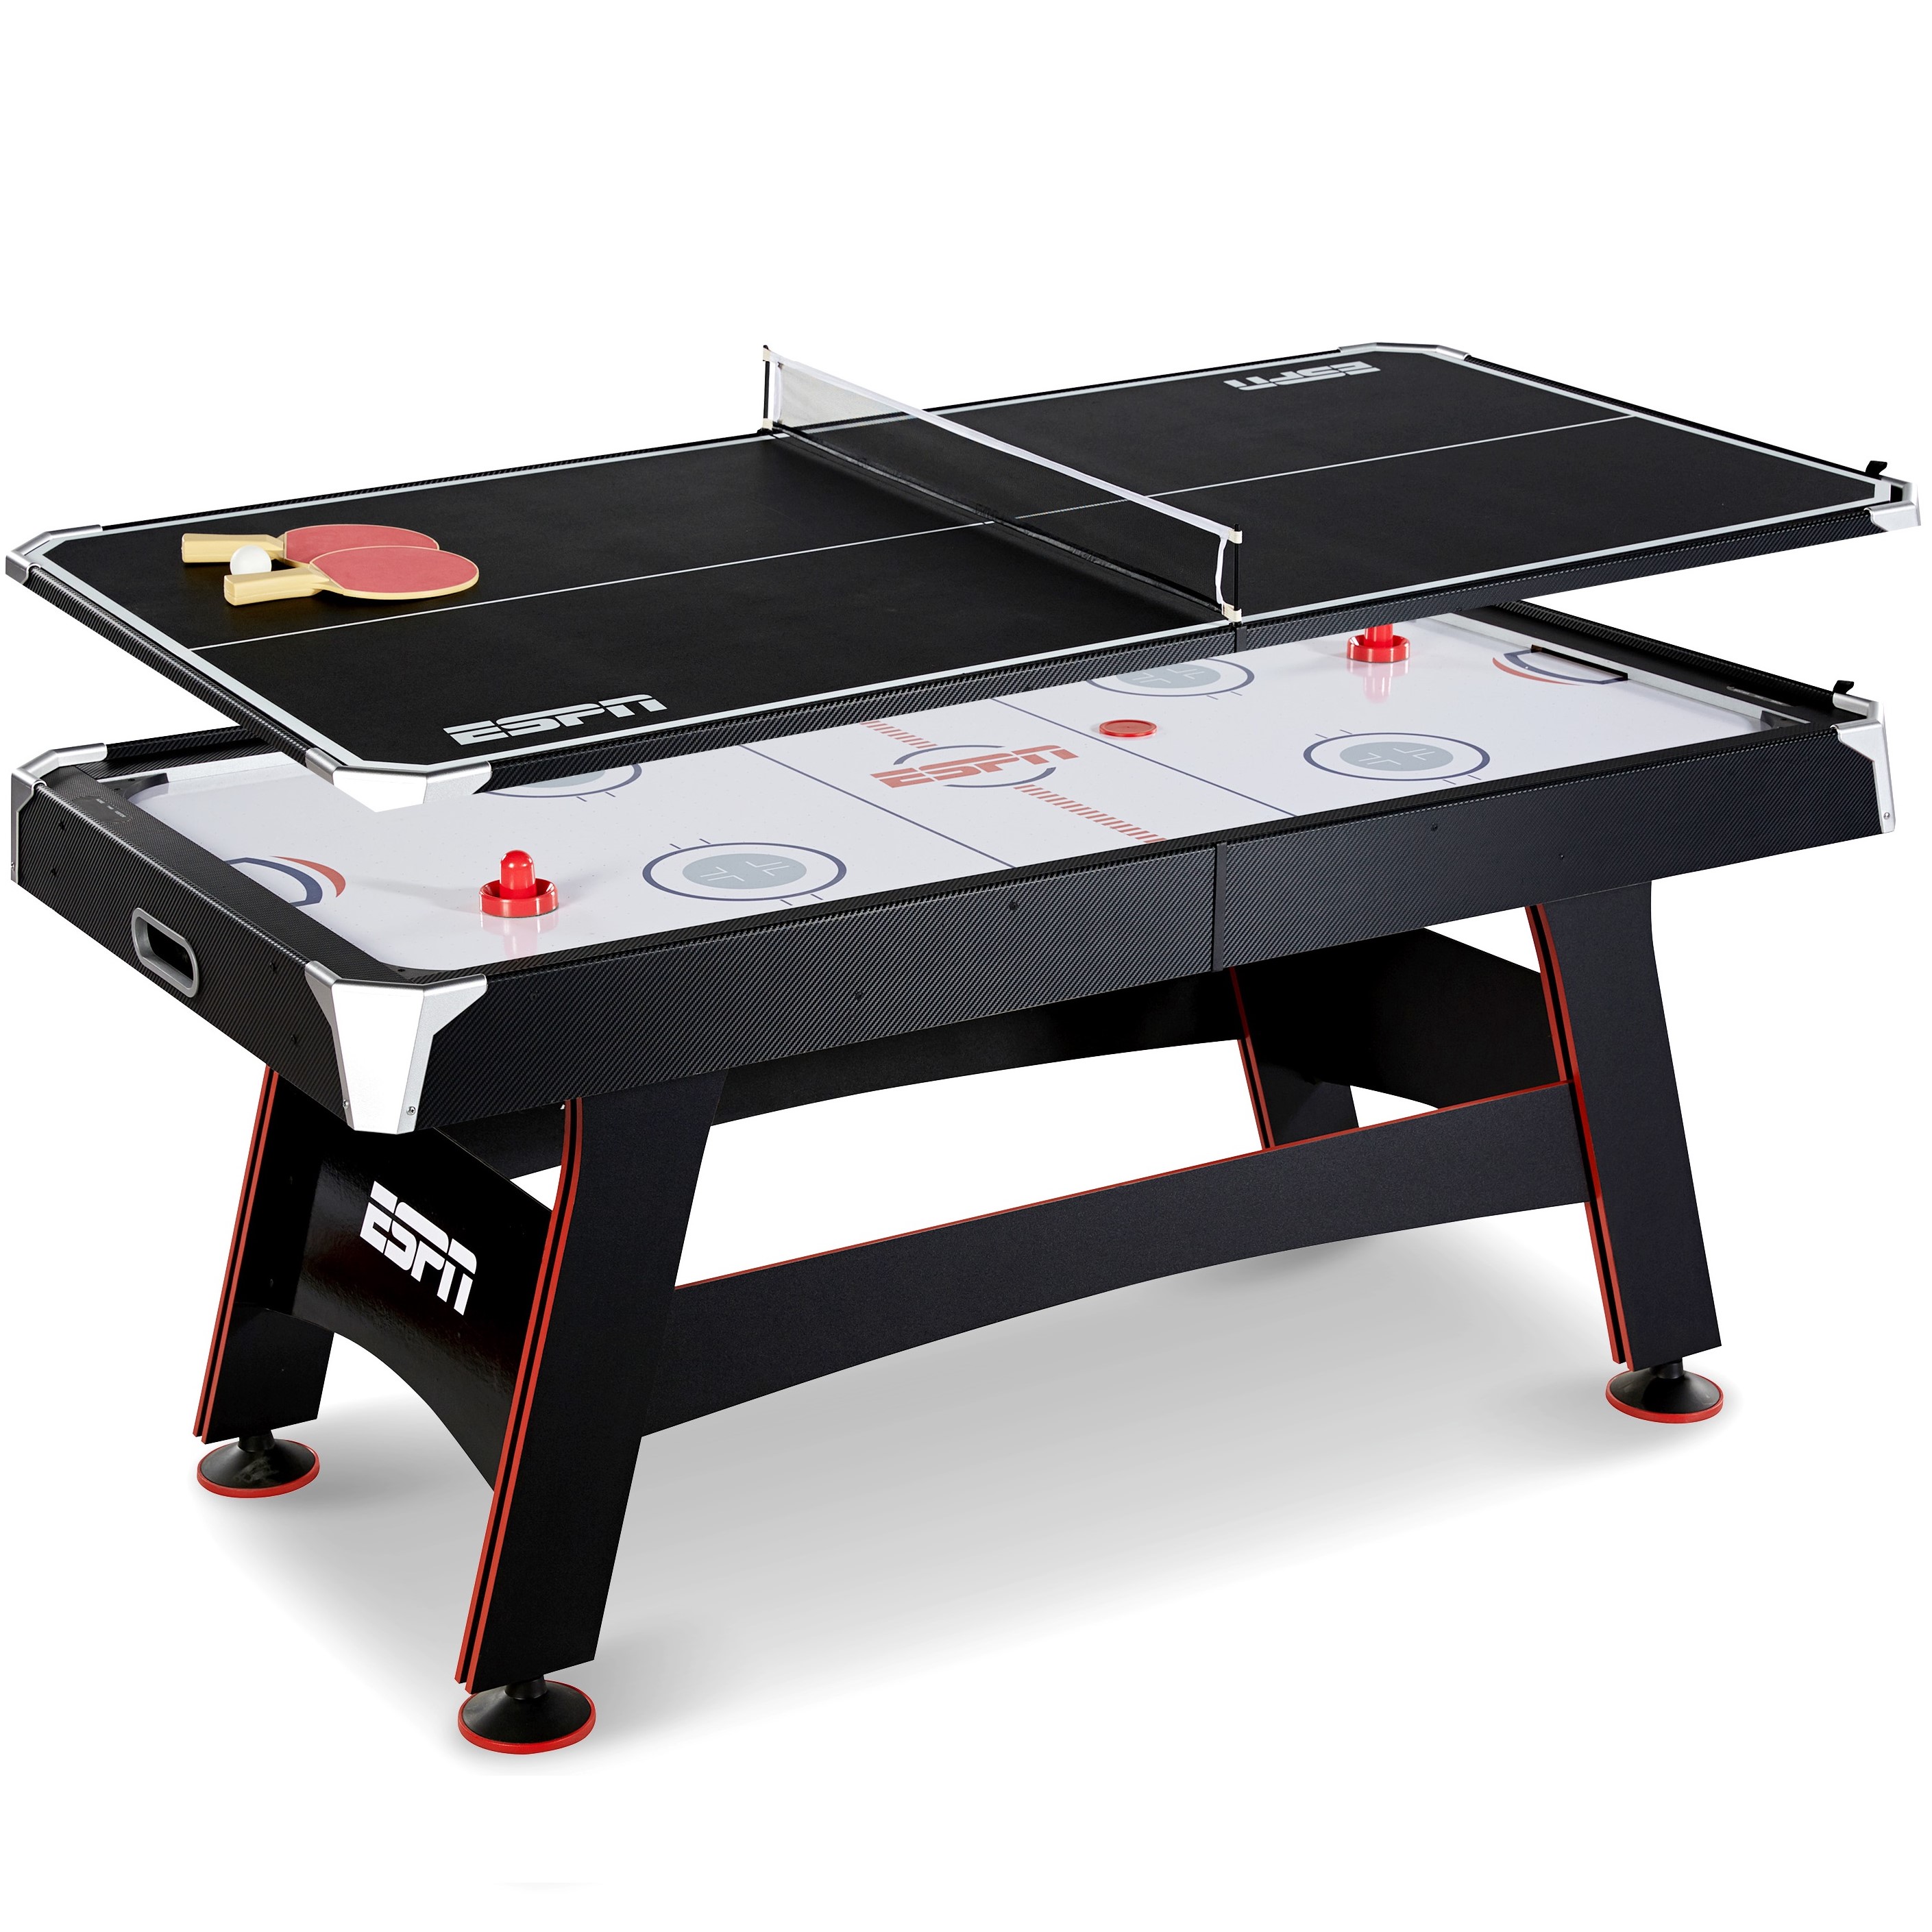 ESPN 72" Air Hockey Game Table & Table Tennis Top, Accessories Included, Black/Red - image 1 of 13